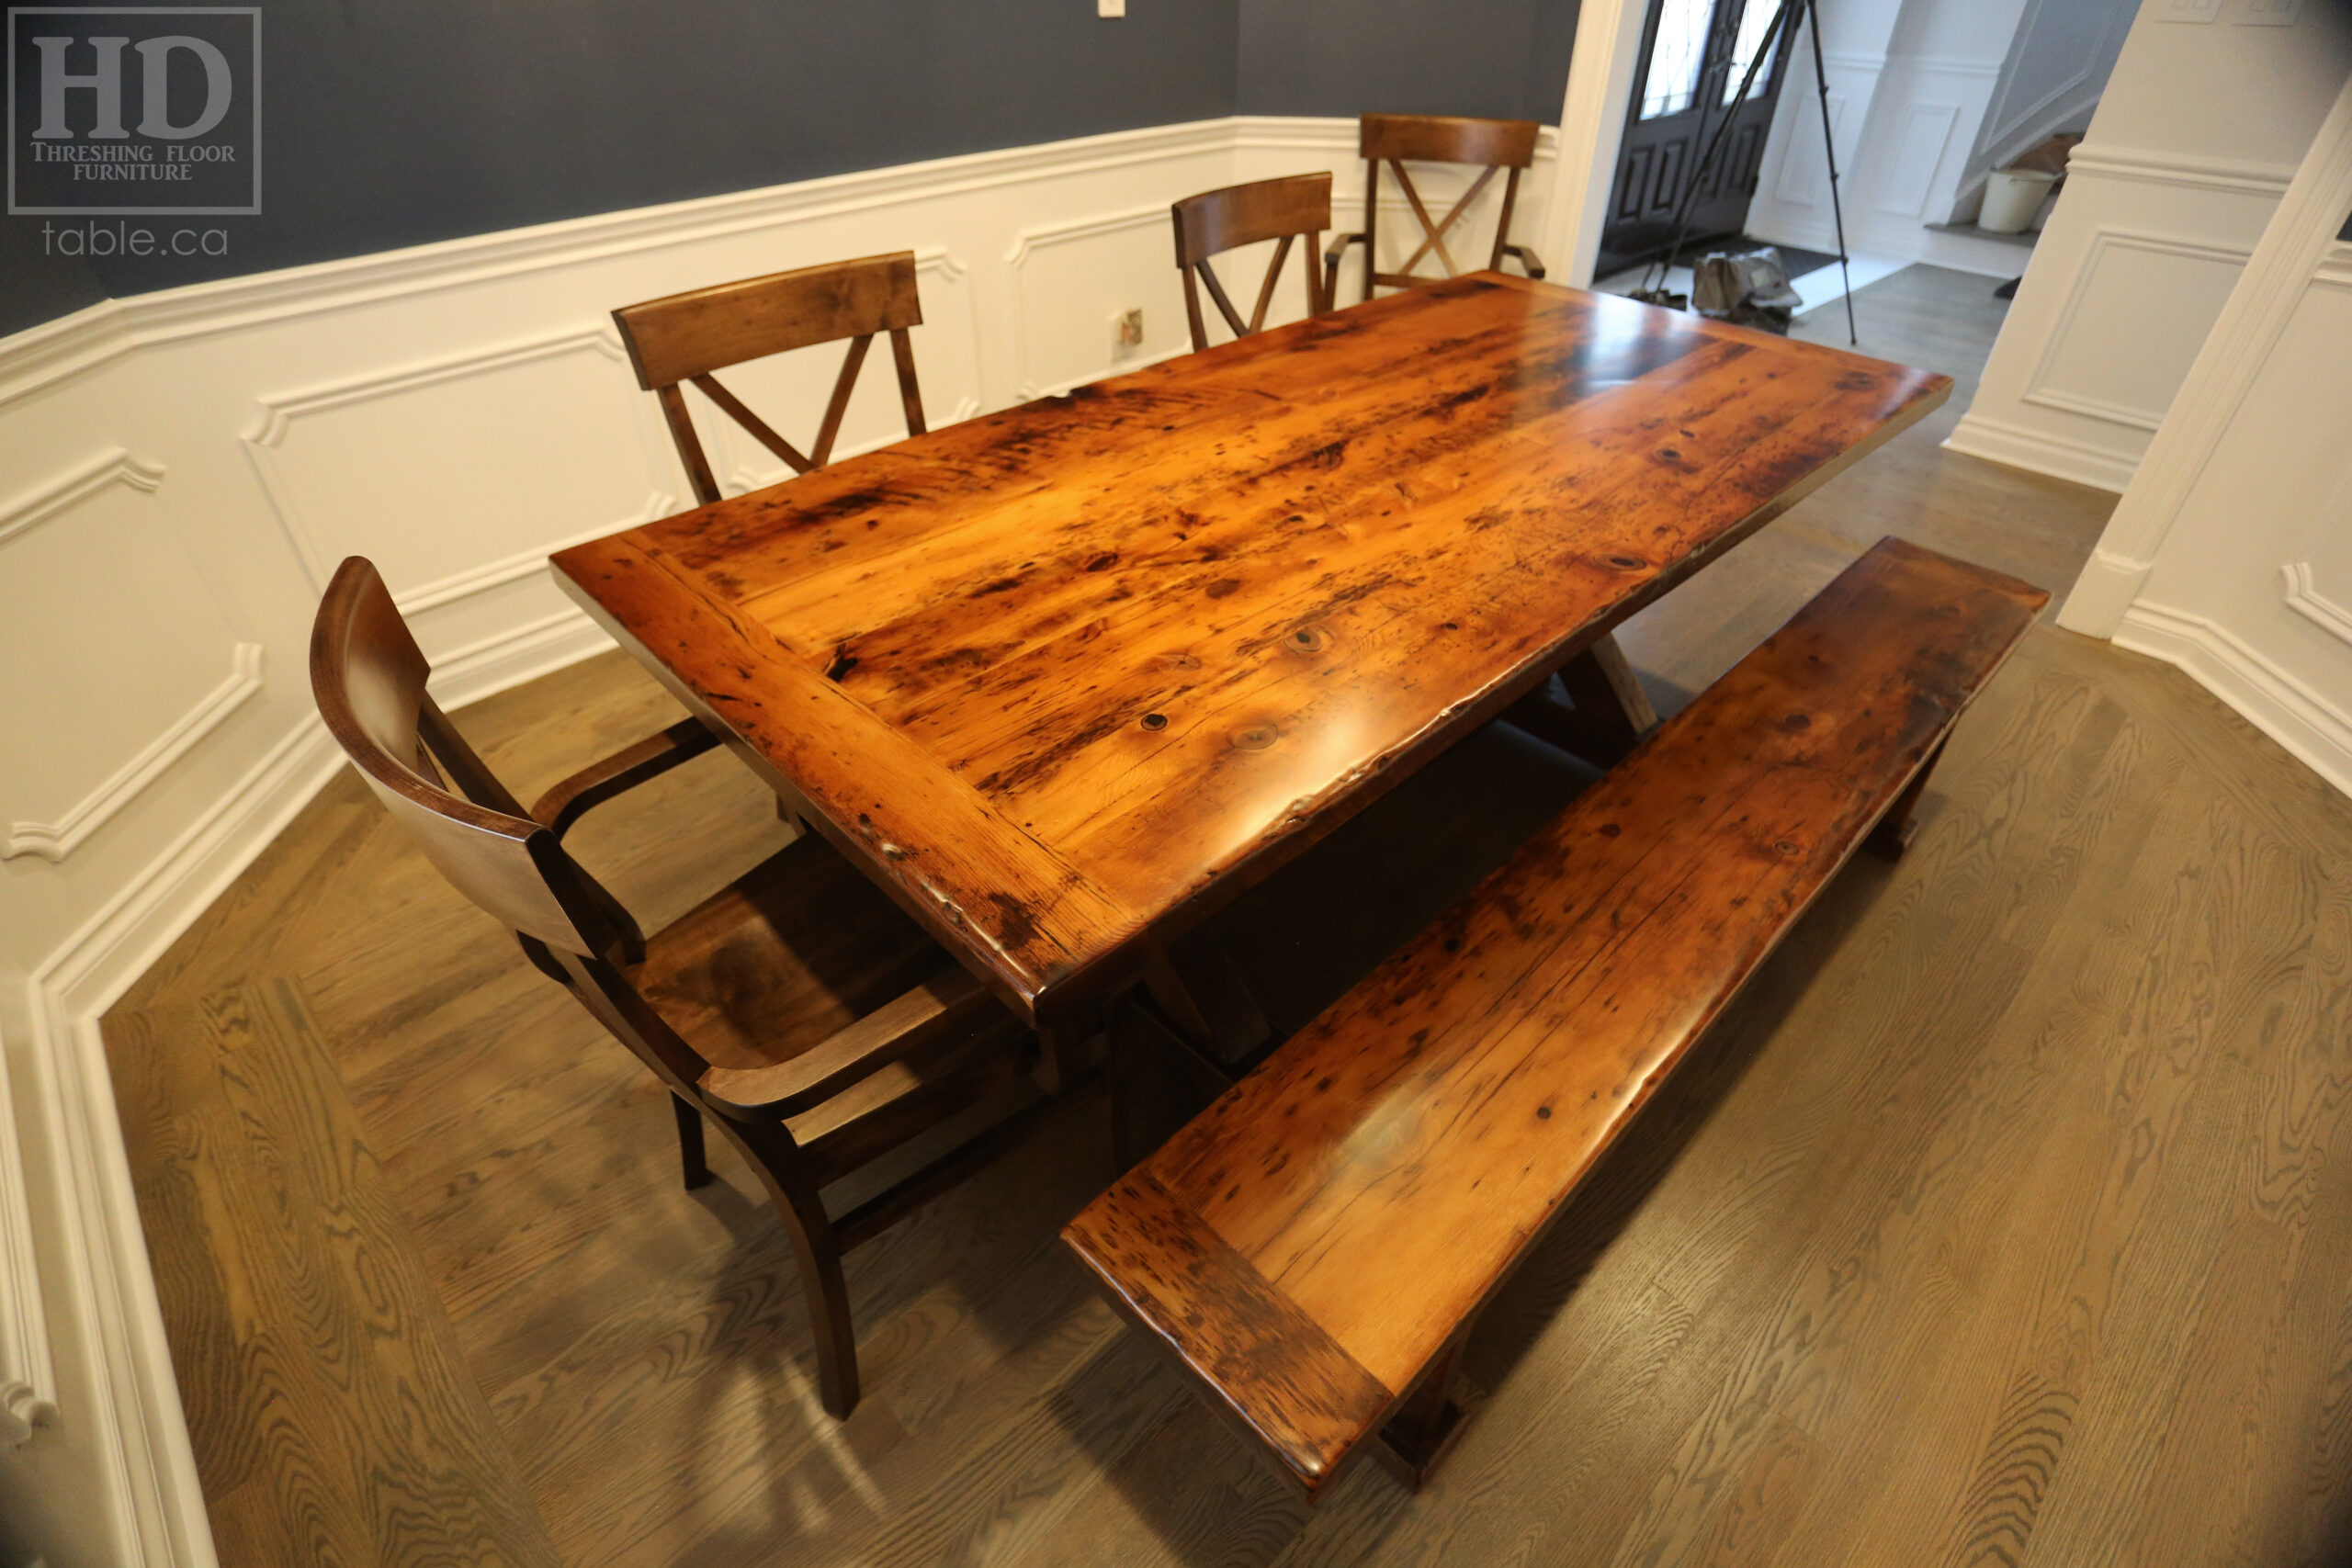 81” Ontario Barnwood Table we made for a Mississauga, Ontario Home – 39” wide – Beam Style Sawbuck Base Option – Old Growth Reclaimed Hemlock Threshing Floor Construction – Original edges & distressing maintained - Premium epoxy + satin polyurethane finish – 81” [matching] Bench - www.table.ca